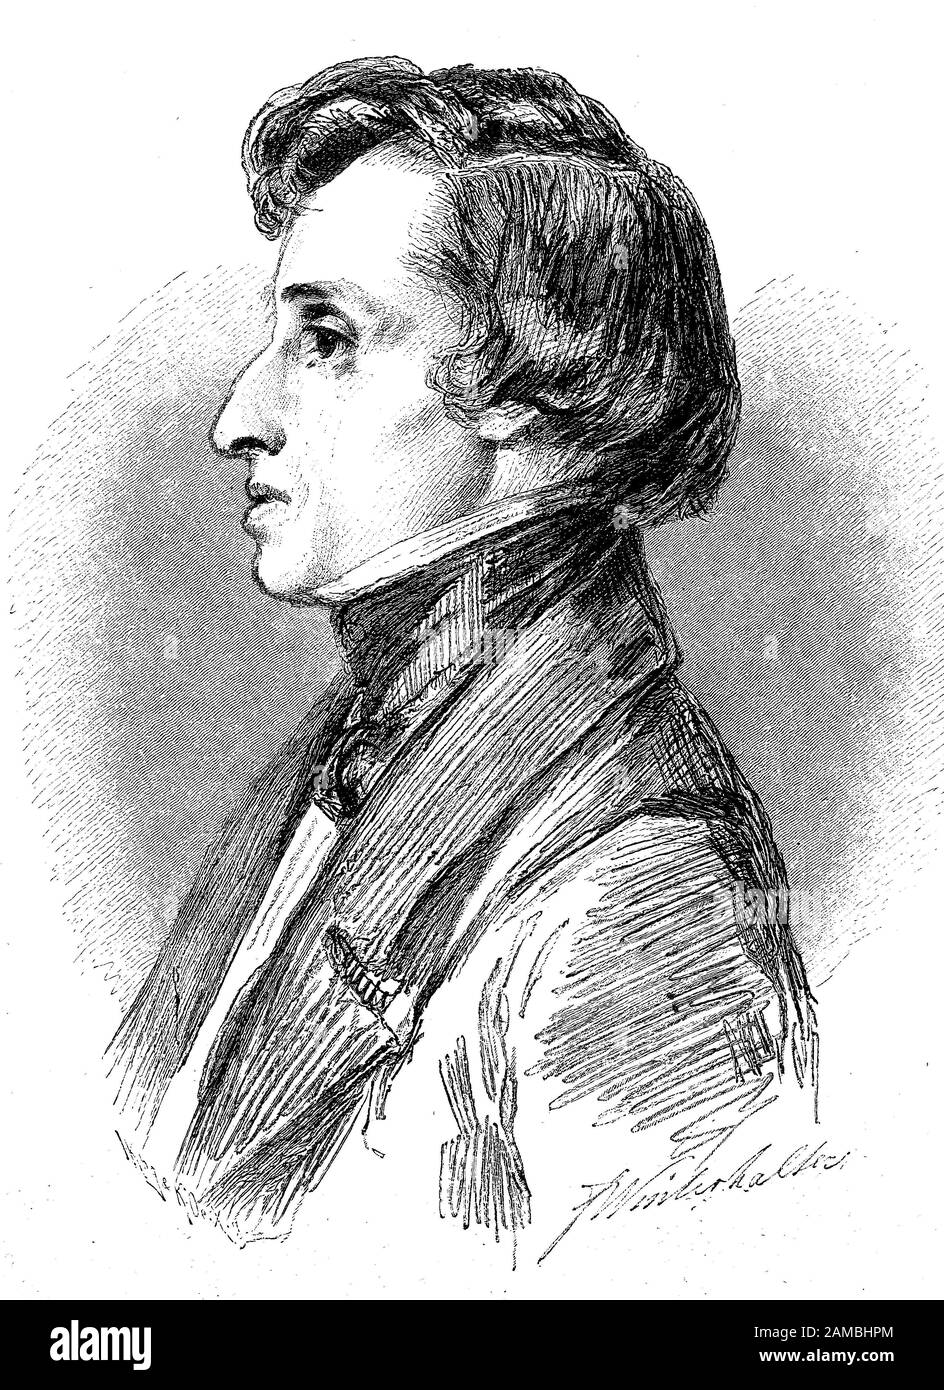 Frederic François Chopin, 1810-1849, was a Polish composer and virtuoso pianist of the Romantic era  /  Frederic Francois Chopin, 1810-1849, war ein polnischer Komponist und virtuoser Pianist der Romantik, Historisch, digital improved reproduction of an original from the 19th century / digitale Reproduktion einer Originalvorlage aus dem 19. Jahrhundert, Stock Photo